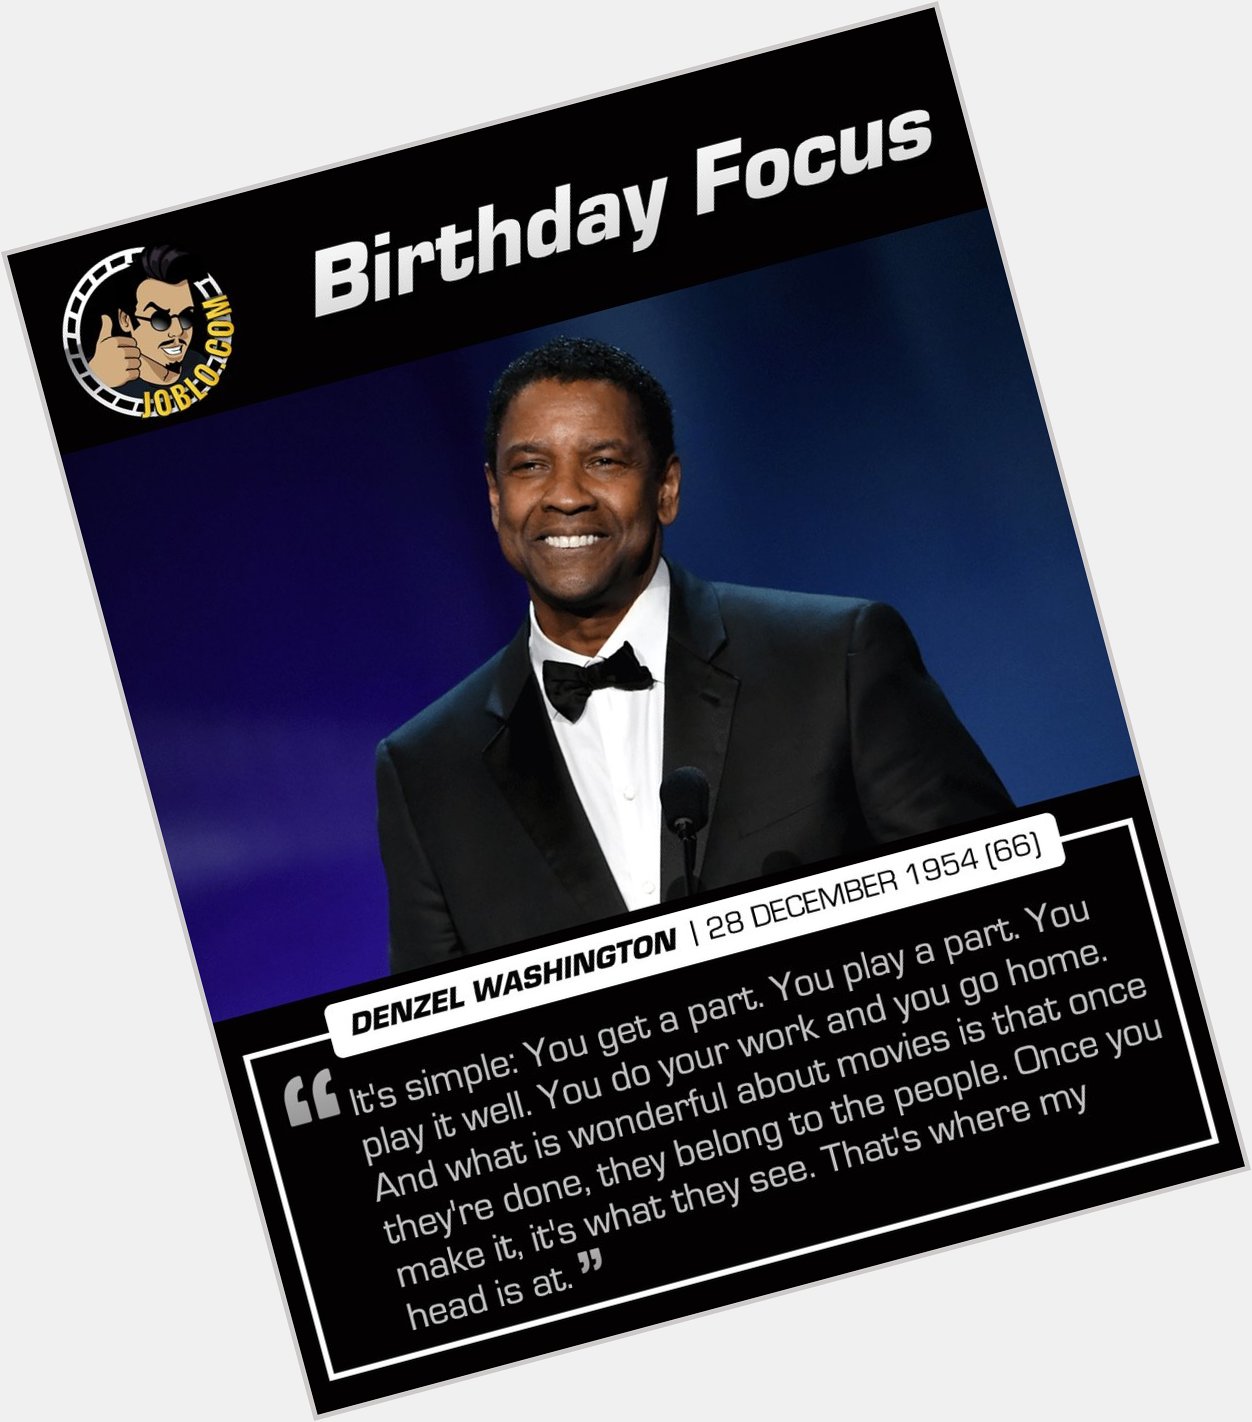 Wishing the incredible Denzel Washington a very happy 66th birthday!

What is your favorite movie of his? 